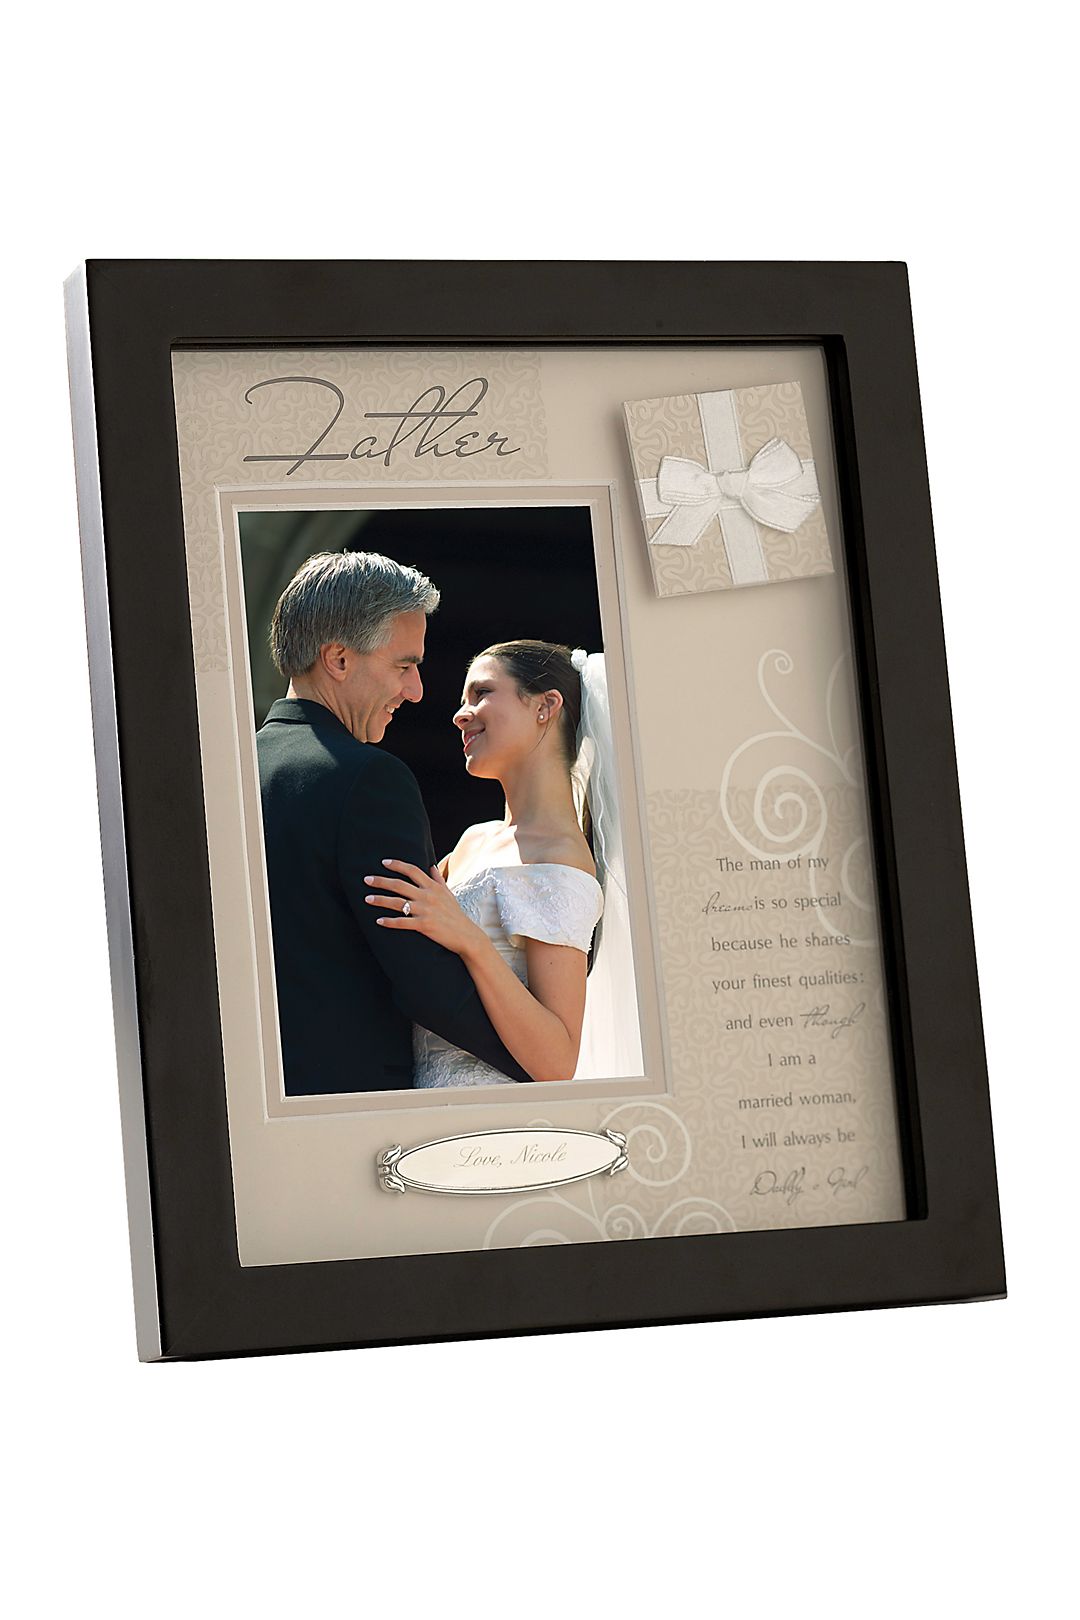 Personalized Father's Shadow Box Frame Image 2